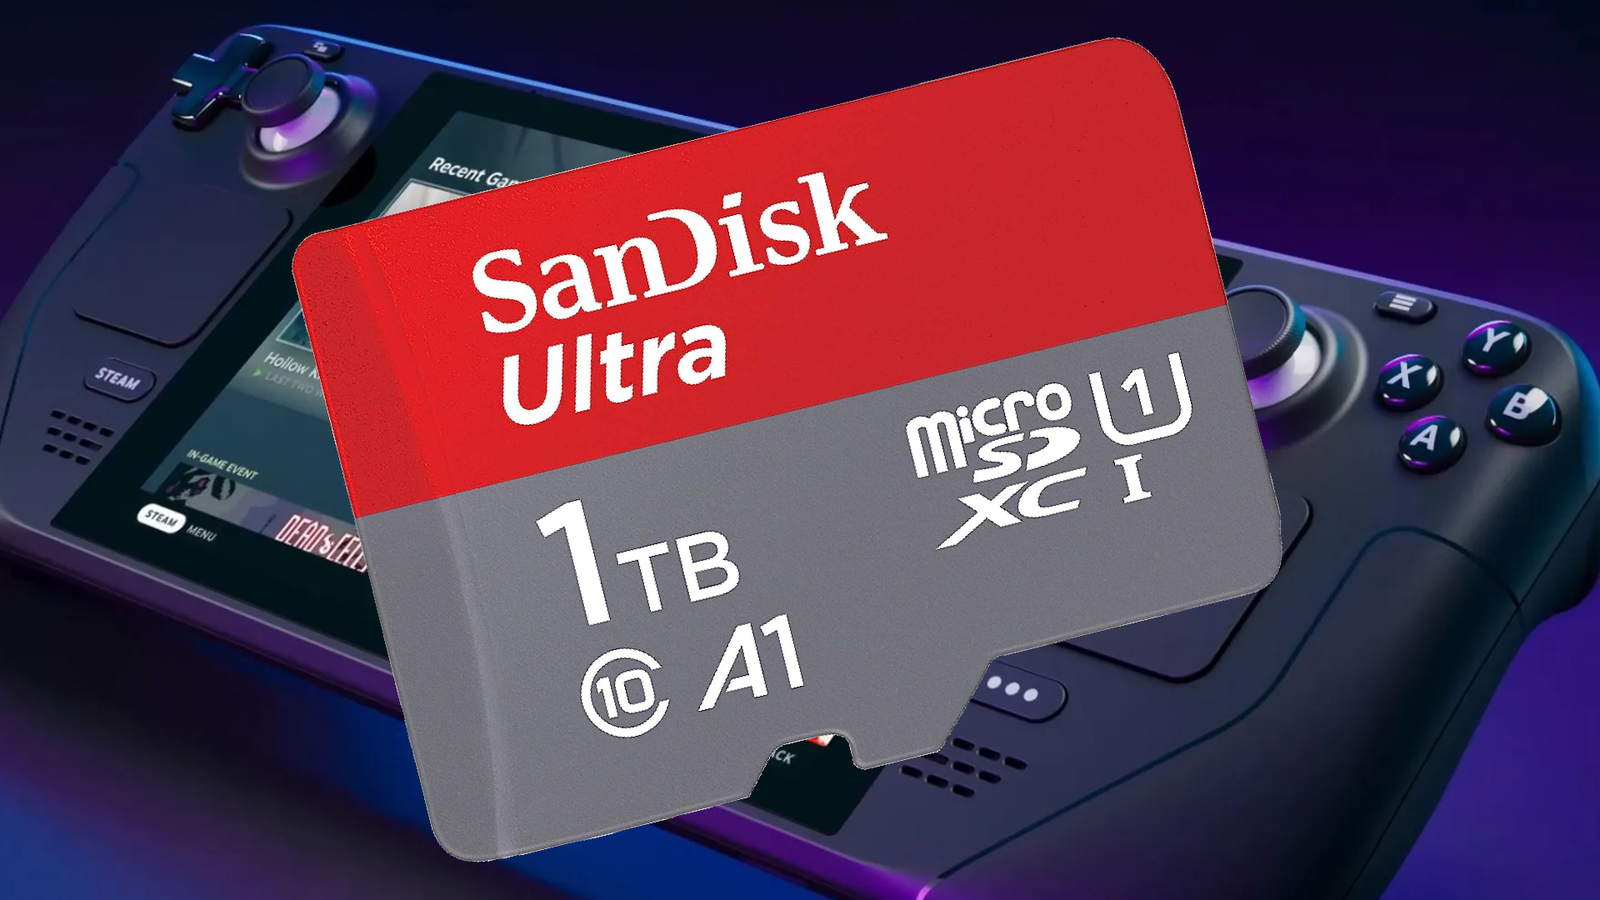 https://assetsio.reedpopcdn.com/sandisk-1tb-micro-sd-card.png?width=1600&height=900&fit=crop&quality=100&format=png&enable=upscale&auto=webp